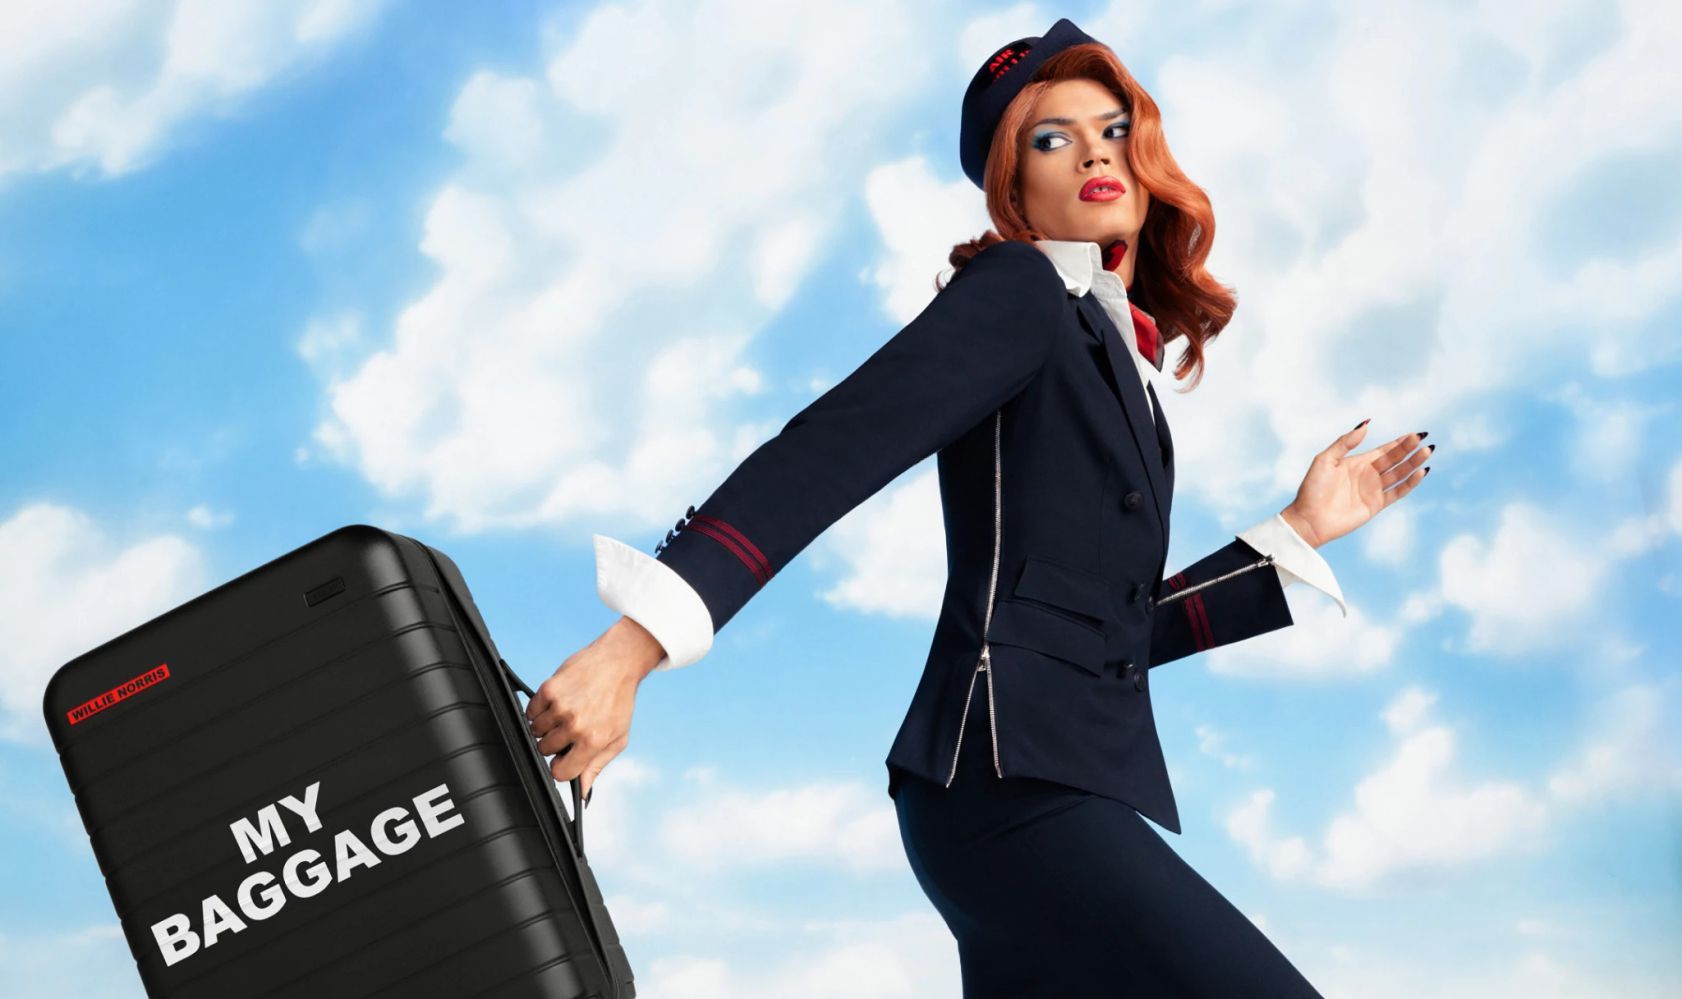 <p>Air Willie is prepared for take off.</p> <p>Fashion designer Willie Norris has partnered with the travel brand Away to launch a new collection of luggage on Thursday in honor of Pride Month, which begins June 1. Featuring the bold text her work is known for, the carry-ons and garment bags are decorated with witty statements like “Something to Declare” and “This Is Personal.”</p> <p>On designing the luggage, Norris told WWD she drew inspiration from air travel signage: “I wanted the products in this collaboration to simultaneously blend in and stand out at an airport, and look like they were signs of their own.”</p> <p>Though Norris referred to designing on luggage as a “dream blank canvas,” the format did come with some challenges. “Getting my signature bold type to translate properly onto the texture and divots of the Away suitcases was a challenge that the design team at Away handled with aplomb,” Norris explained.</p> <p>Proceeds from Norris’ collaboration with Away will go toward the International LGBTQ+ Travel Association Foundation, an organization advocating for safety and equality within LGBTQ+ tourism. Norris added that Away is a longtime supporter of IGLTA; the designer emphasized the importance of supporting the queer community beyond Pride Month.</p> <p>“Away’s mission to transform travel resonated deeply with me,” Norris said. “In a world where borders and boundaries can often feel limiting, Away’s ethos stands for openness and inclusivity. They understand that everyone’s journey is unique, and they strive to make traveling an empowering and positive experience for all.”</p> <p>This new collection follows Norris’ previous collaboration with Away, which included suitcases designed for members of the queer community traveling during Pride — however, they weren’t on sale for the general public. This year, the designs are on the market, with the Bigger Carry-On retailing for $295 and the Garment Bag available for $195.</p> <p>When it comes to jetting off, Norris offers succinct and sage advice: “Take it all in stride. Traveling is a privilege — be grateful for the ability to do it. Be nice to people. Eat well.”</p>